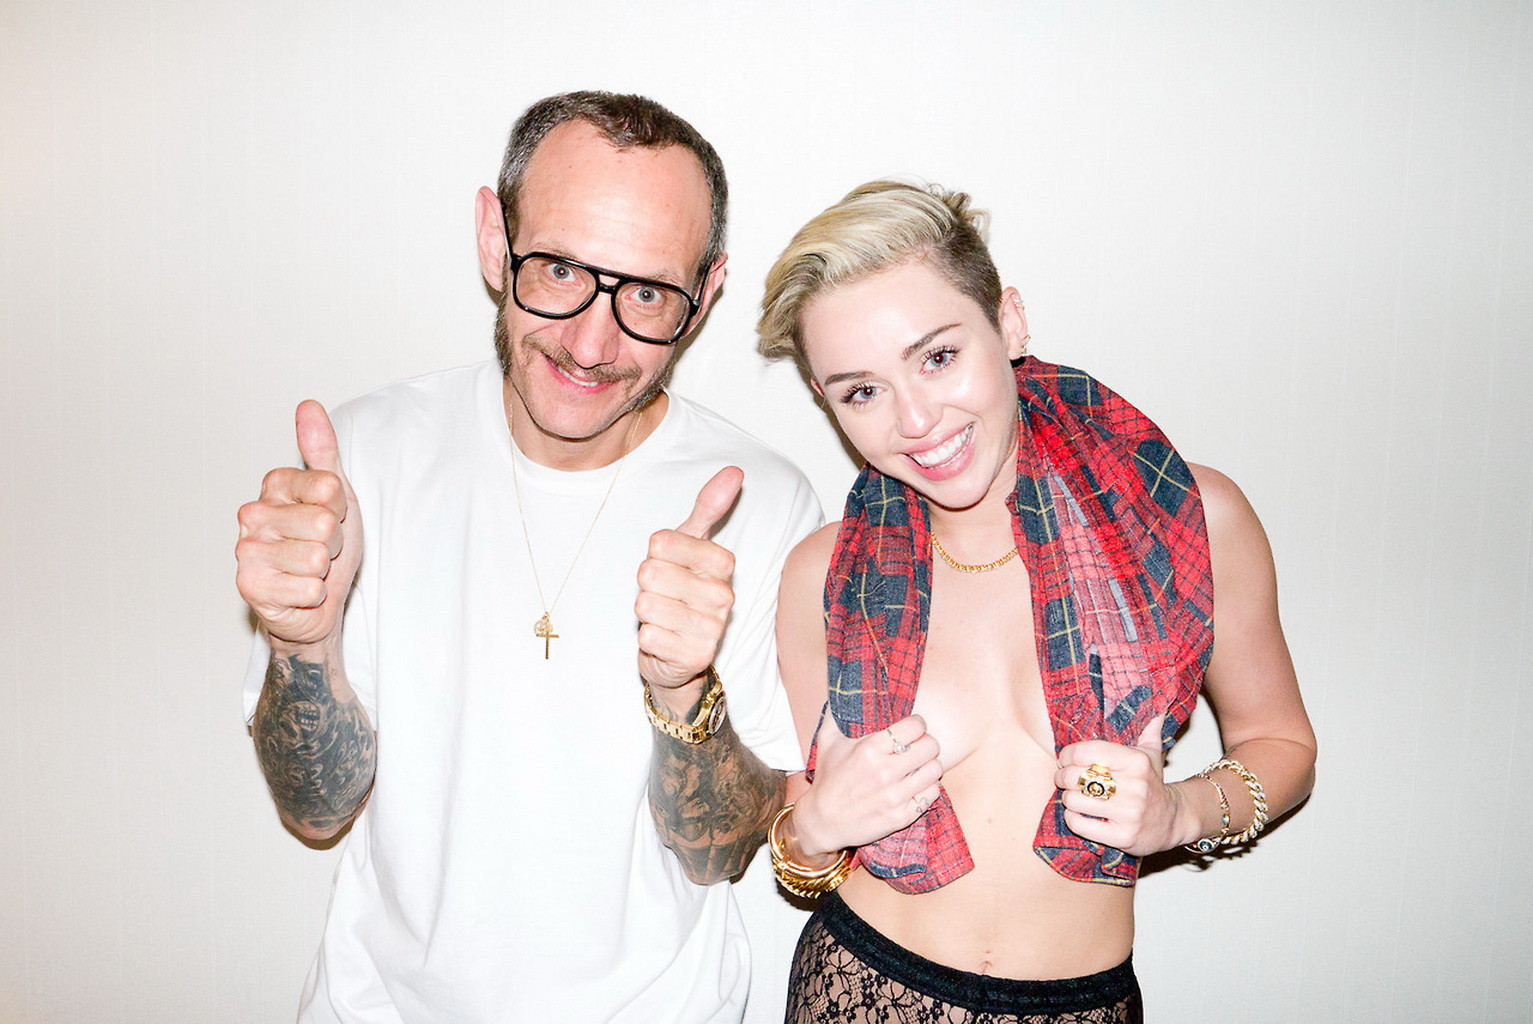 Miley Cyrus showing off her boobs  pussy in Terry Richardson photoshoot #75217343